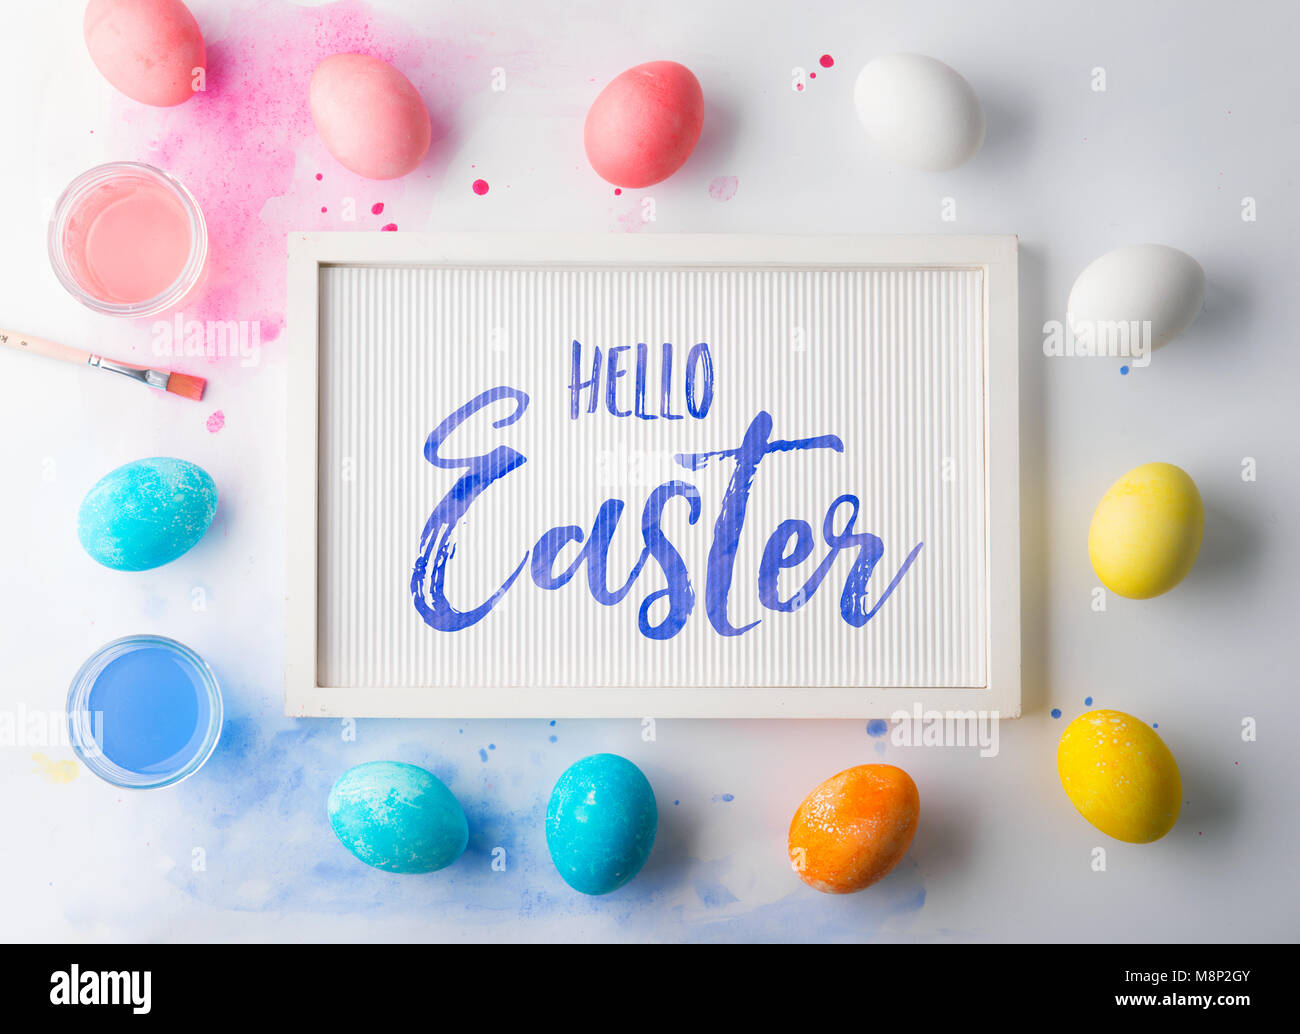 Hello Easter flat lay on a white background. Stock Photo